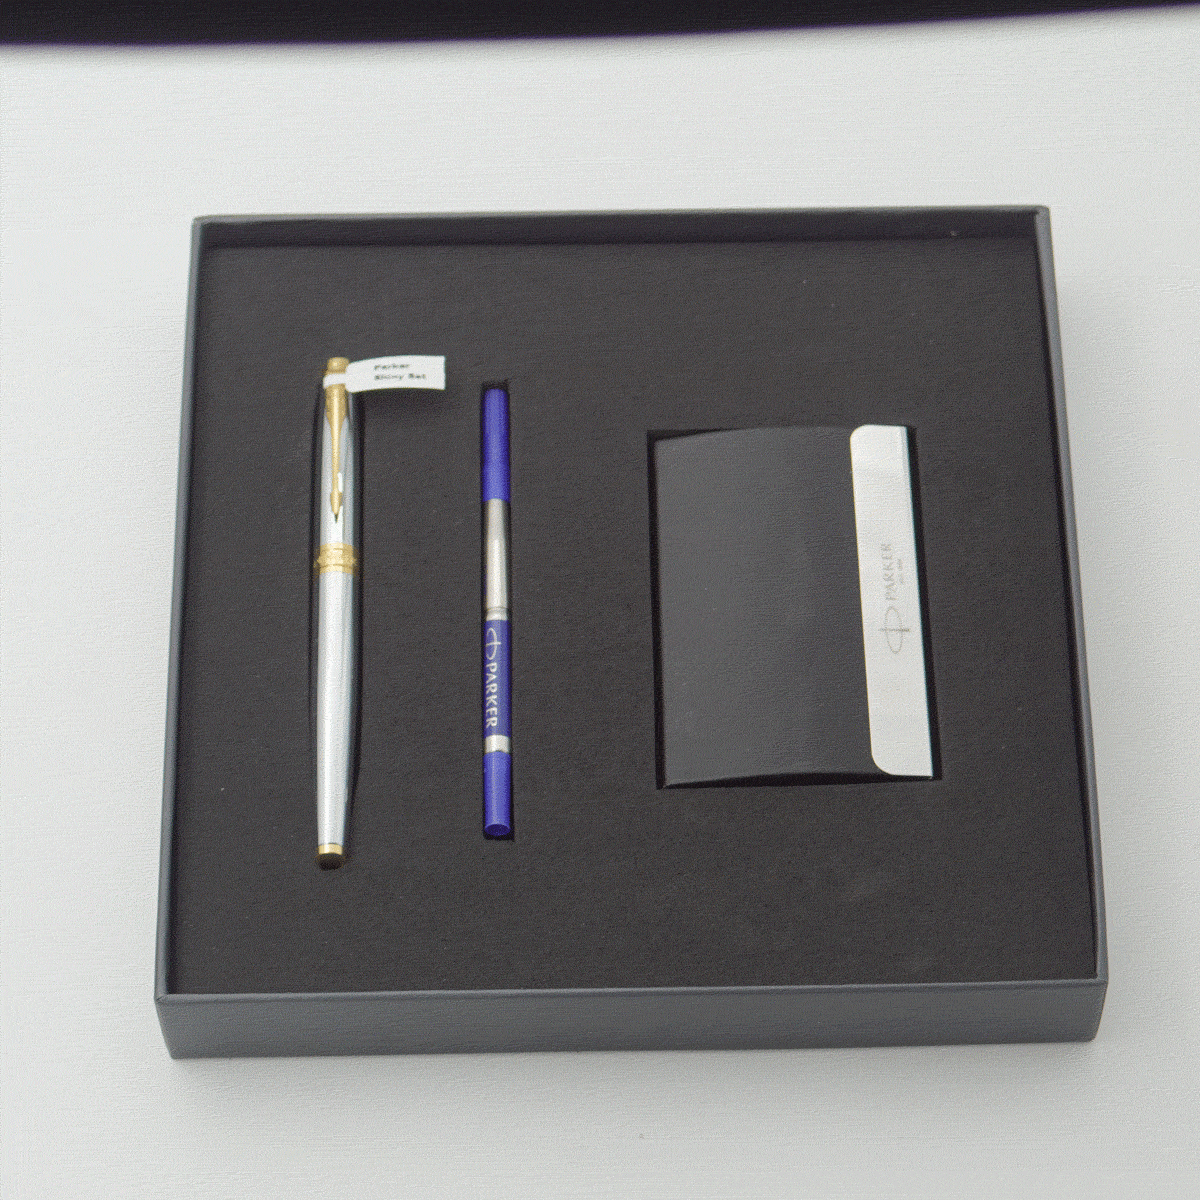 Parker Aster Shiny Silver Color Body With Gold Clip Ultra Fine Tip Roller Ball Pen With Card Holder Pen Set SKU 24194